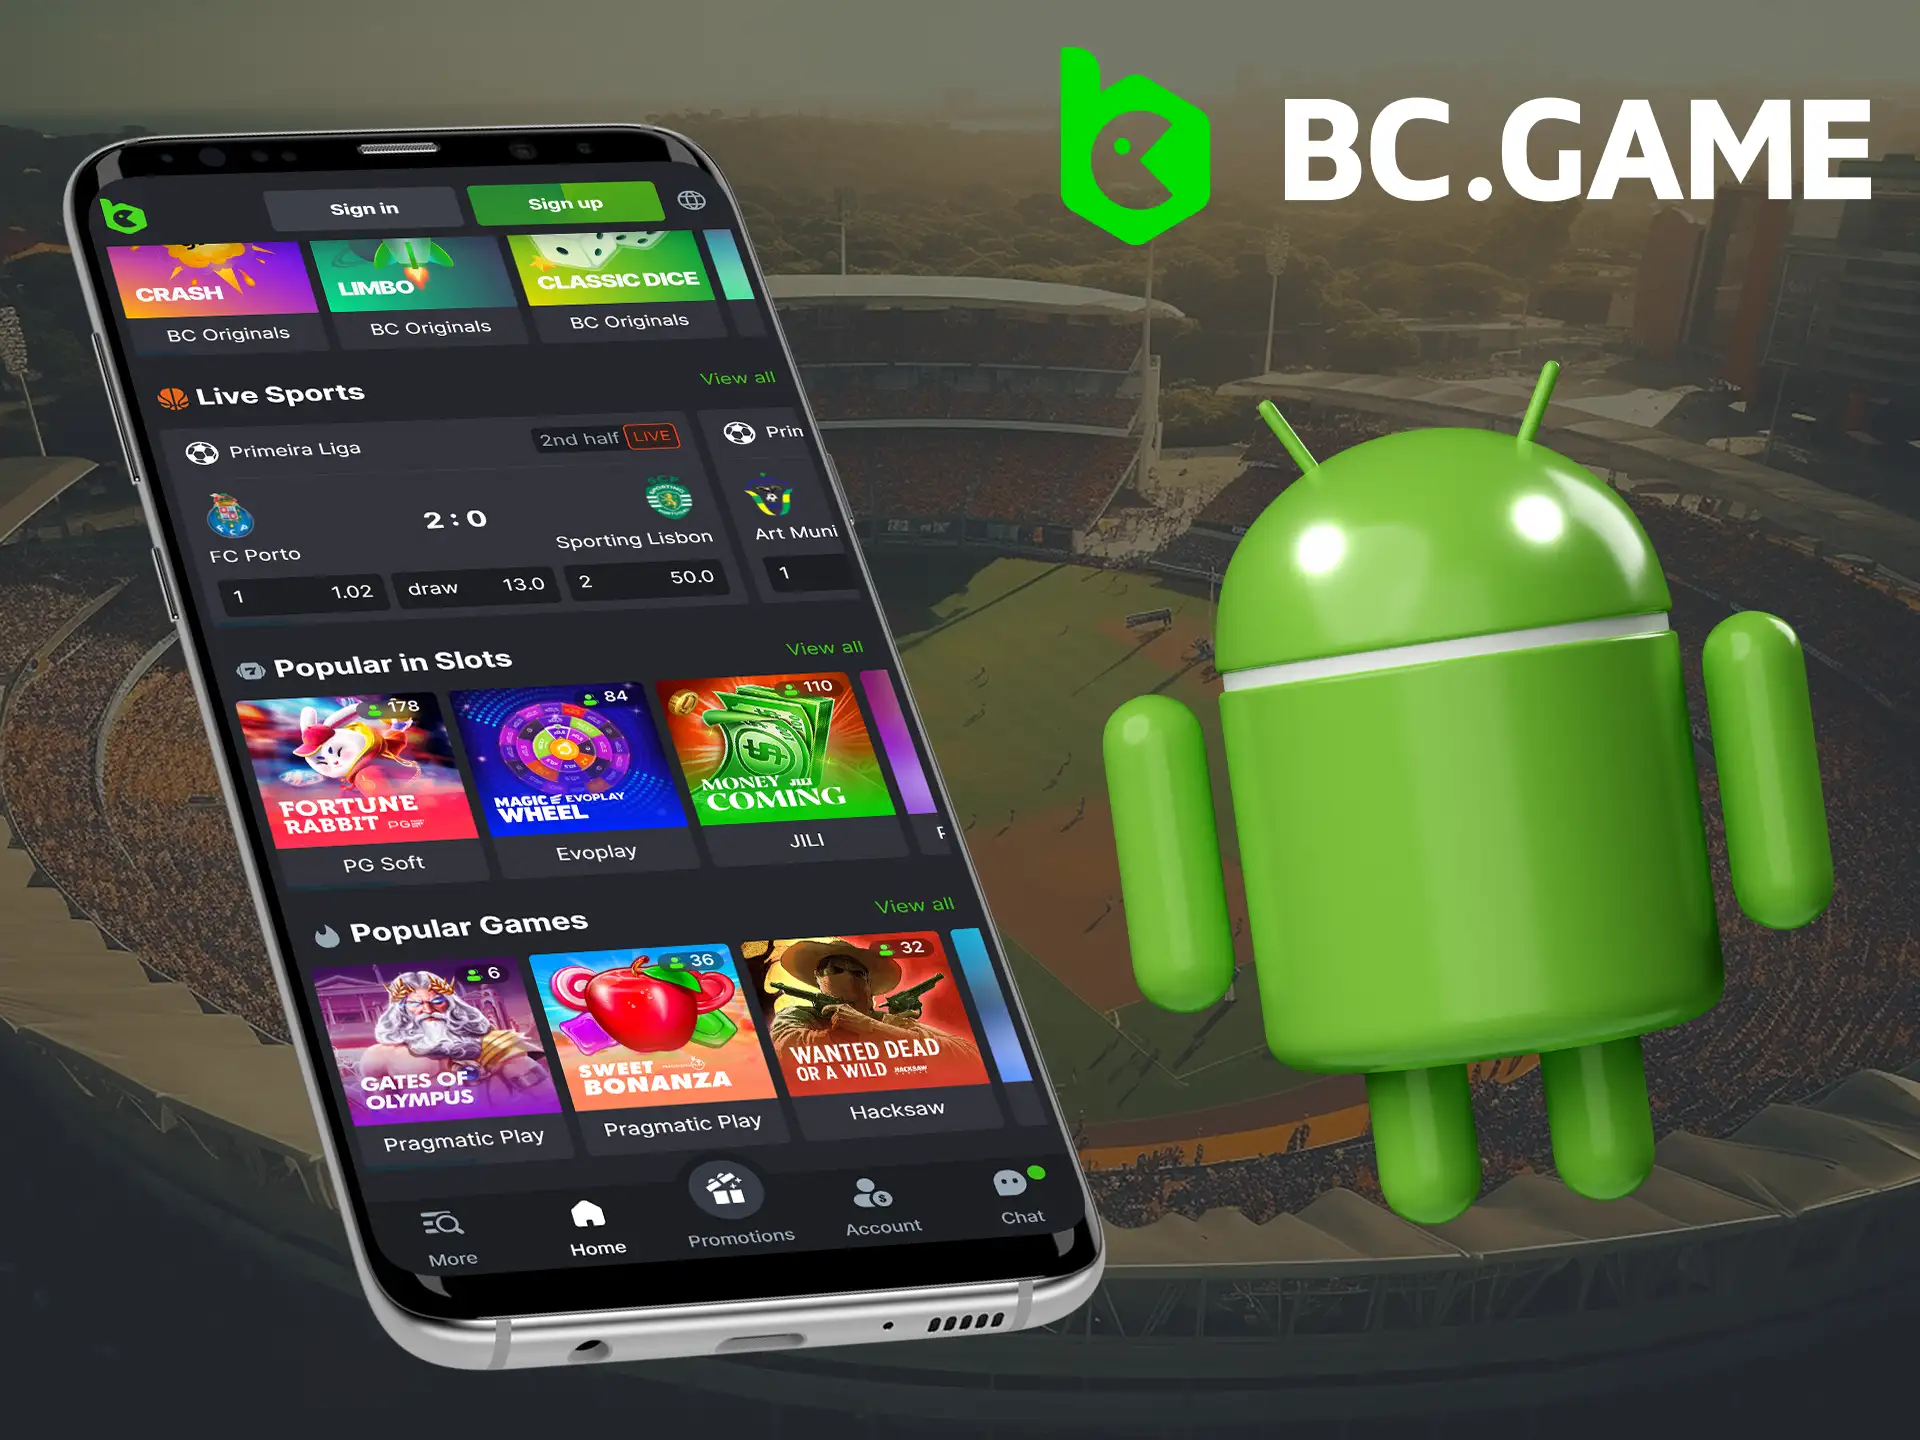 The BC Game mobile application is available for Android users, download the apk file and place bets and play online casinos on your smartphone.